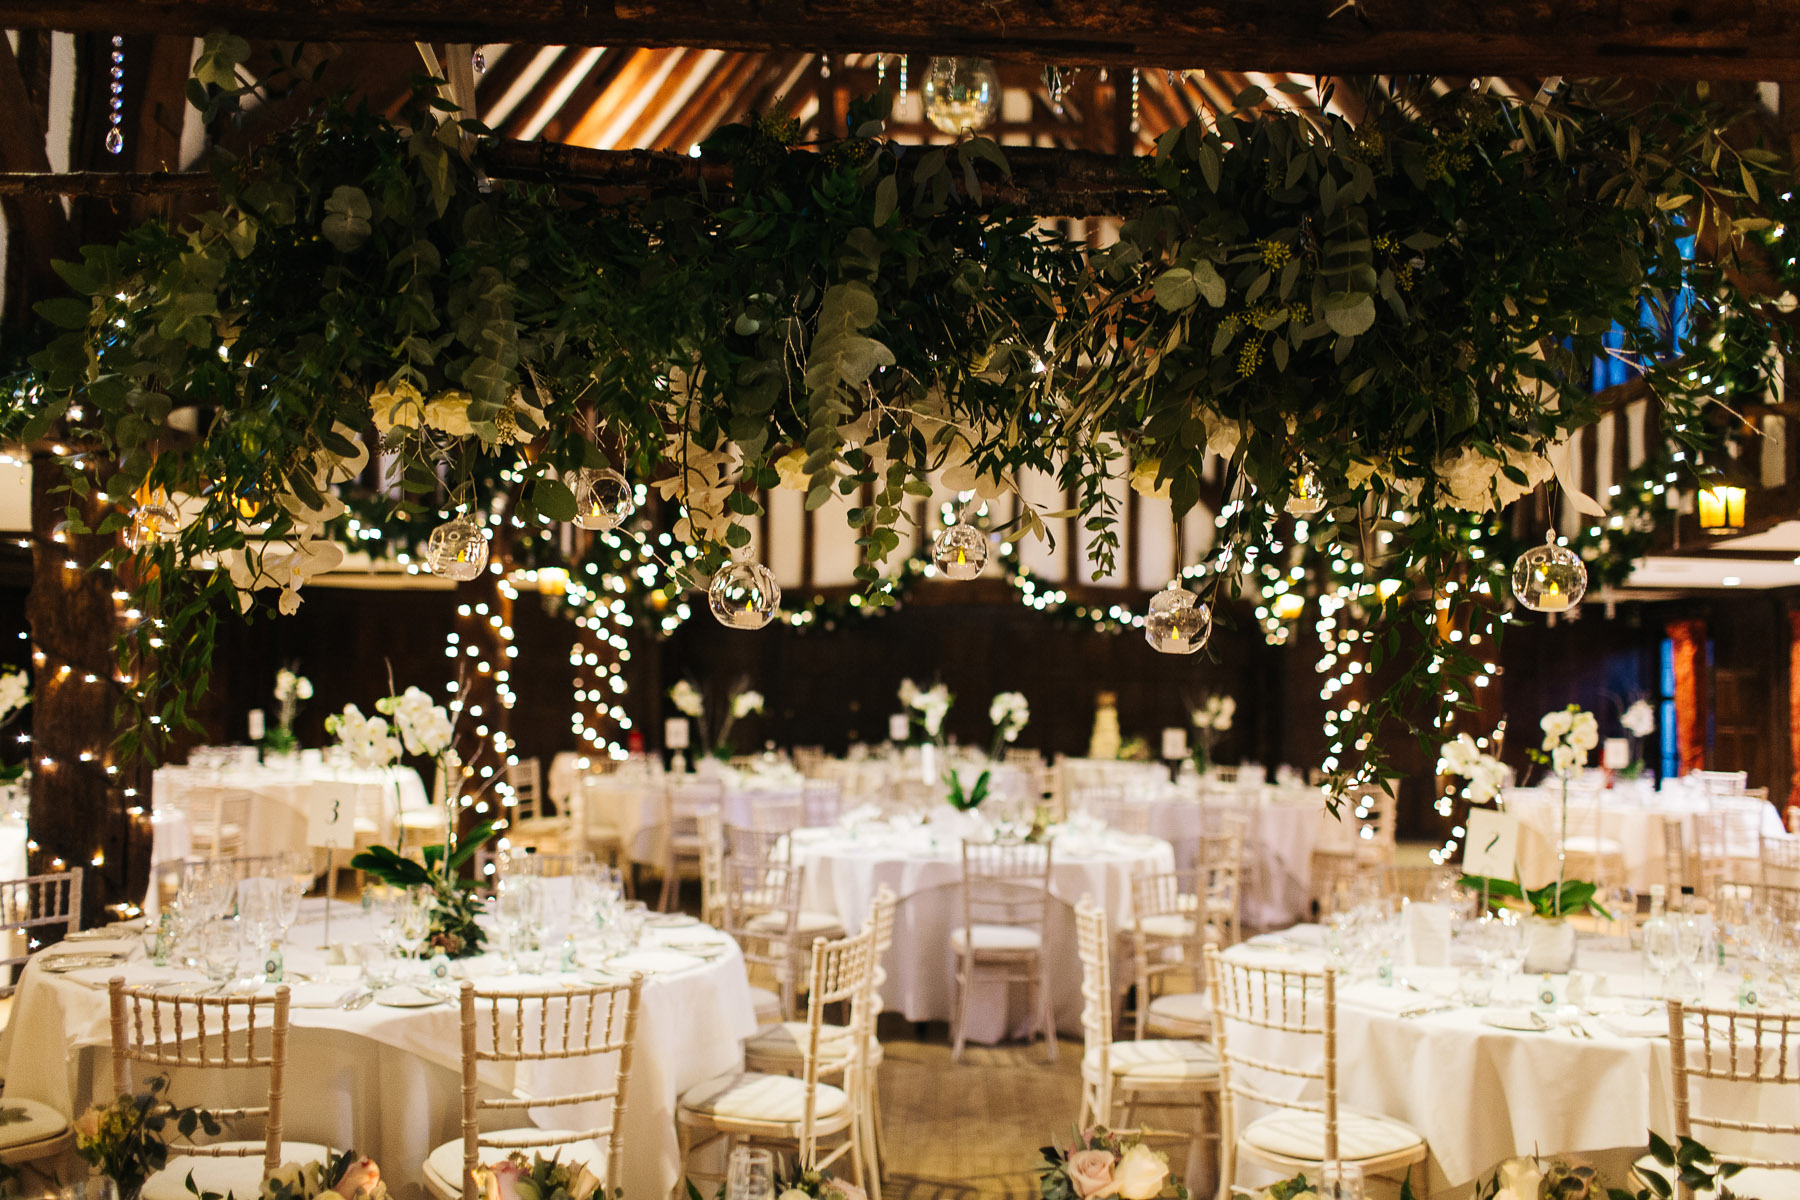 Country Wedding venue decorated for a winter wedding 